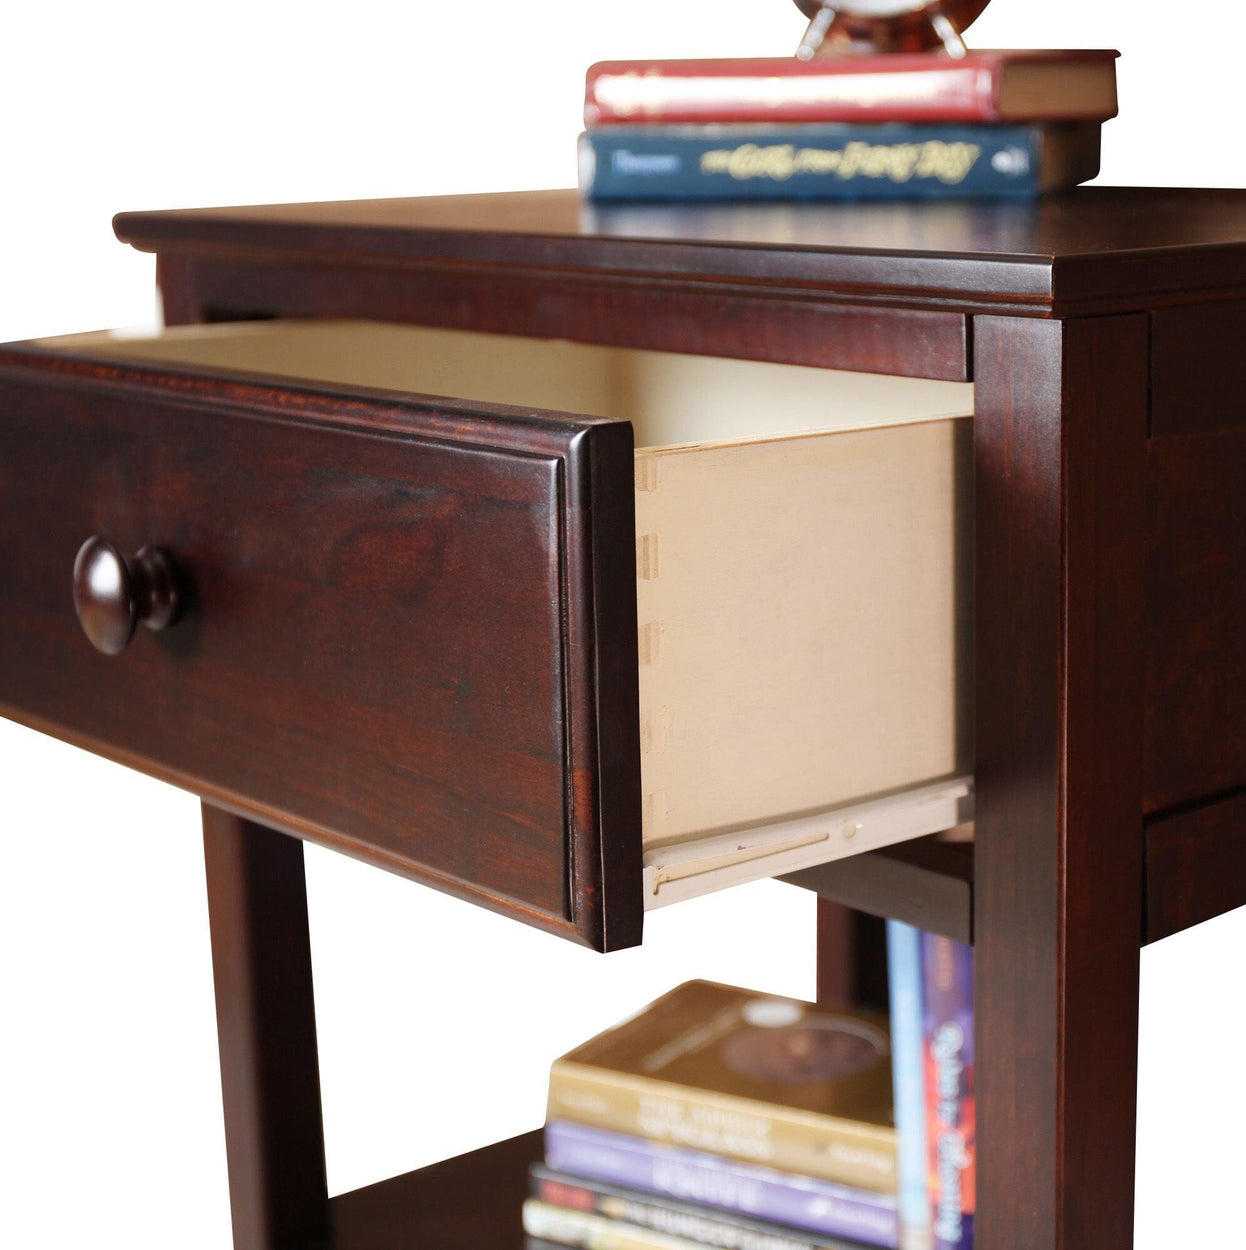 180001-005 : Furniture Nightstand with Drawer and Shelf, Espresso